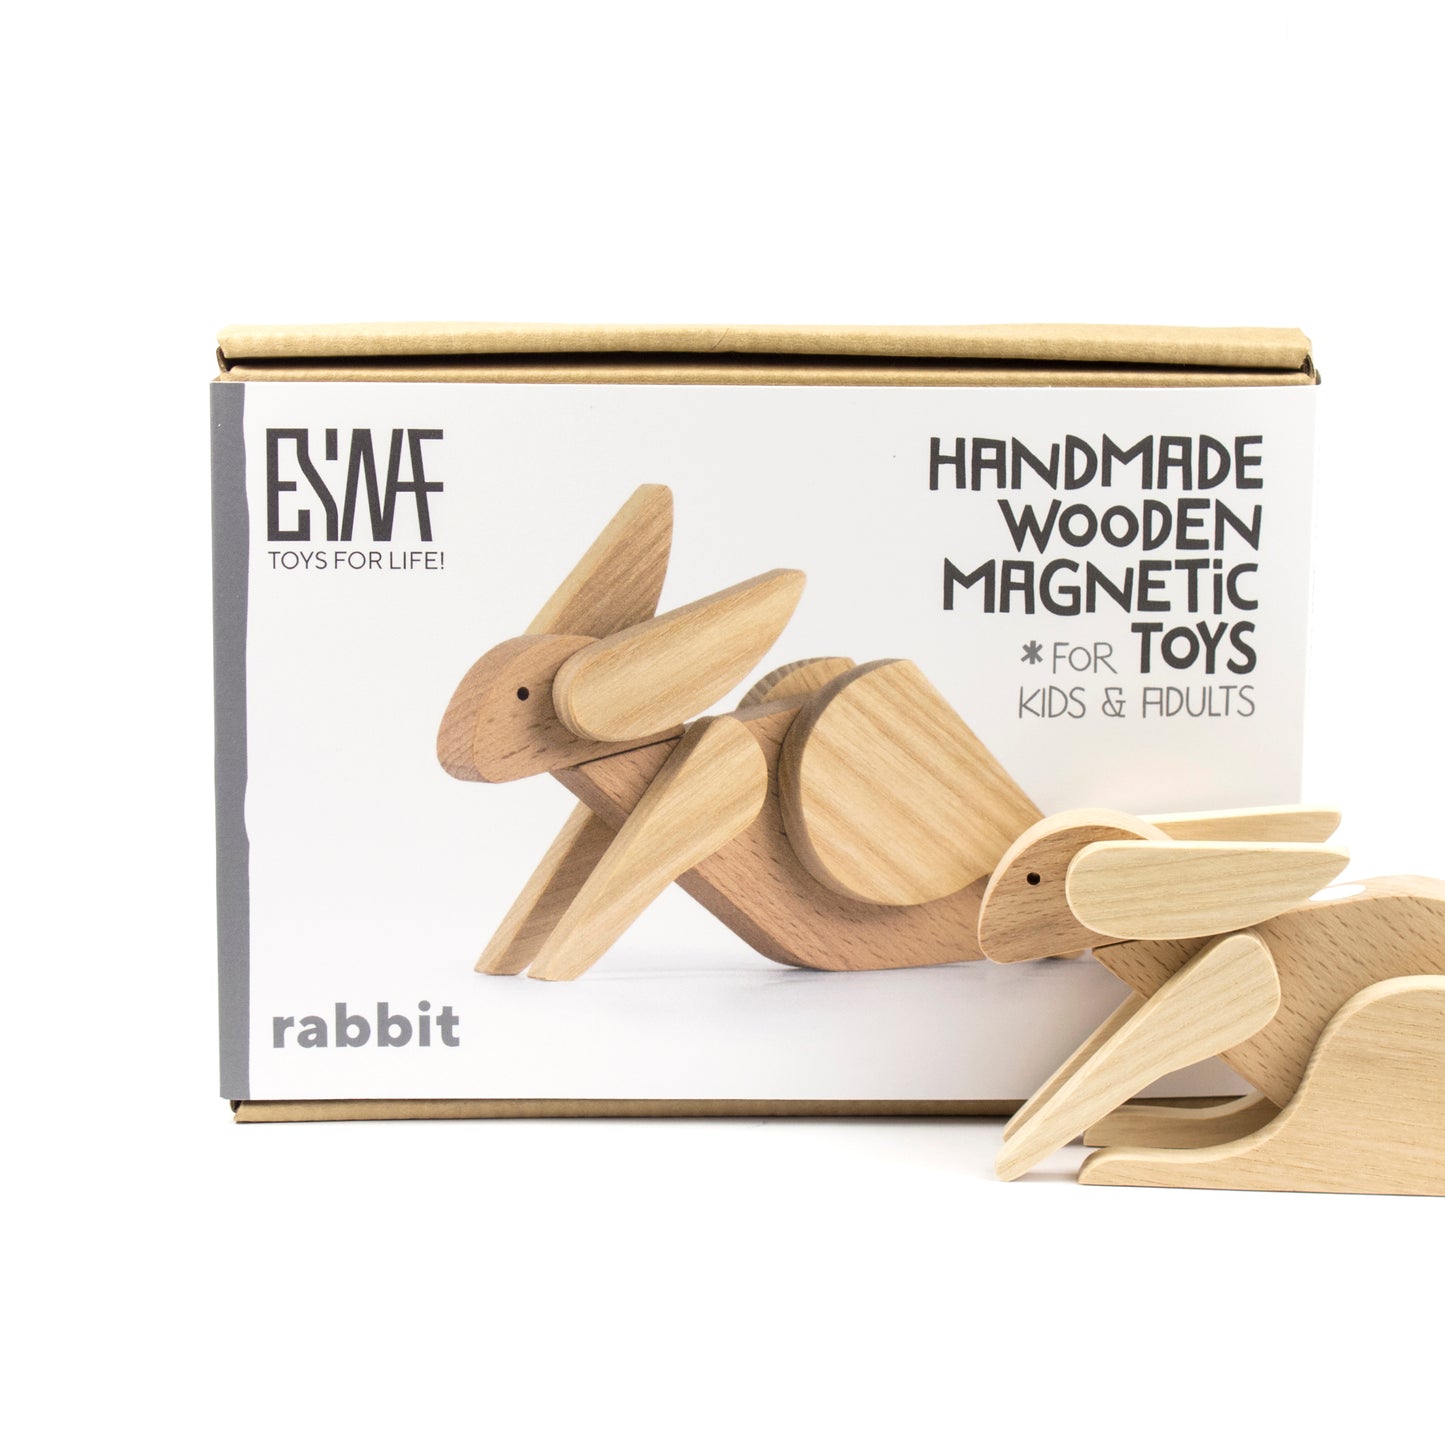 Handmade wooden magnetic toy rabbit with packaging, from ESNAF